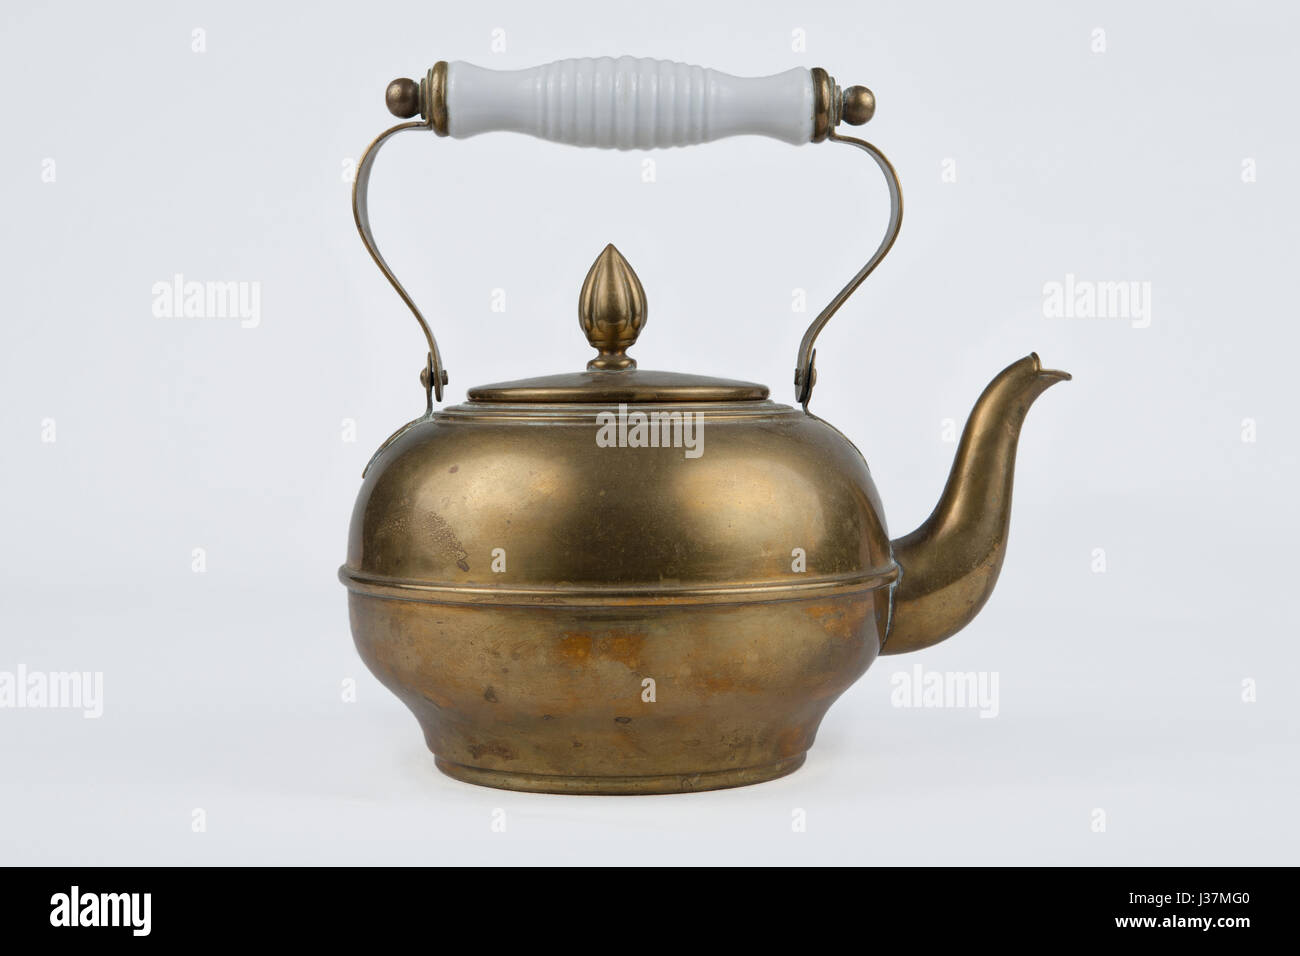 https://c8.alamy.com/comp/J37MG0/old-and-antique-vintage-copper-coffee-pot-on-isolated-white-background-J37MG0.jpg